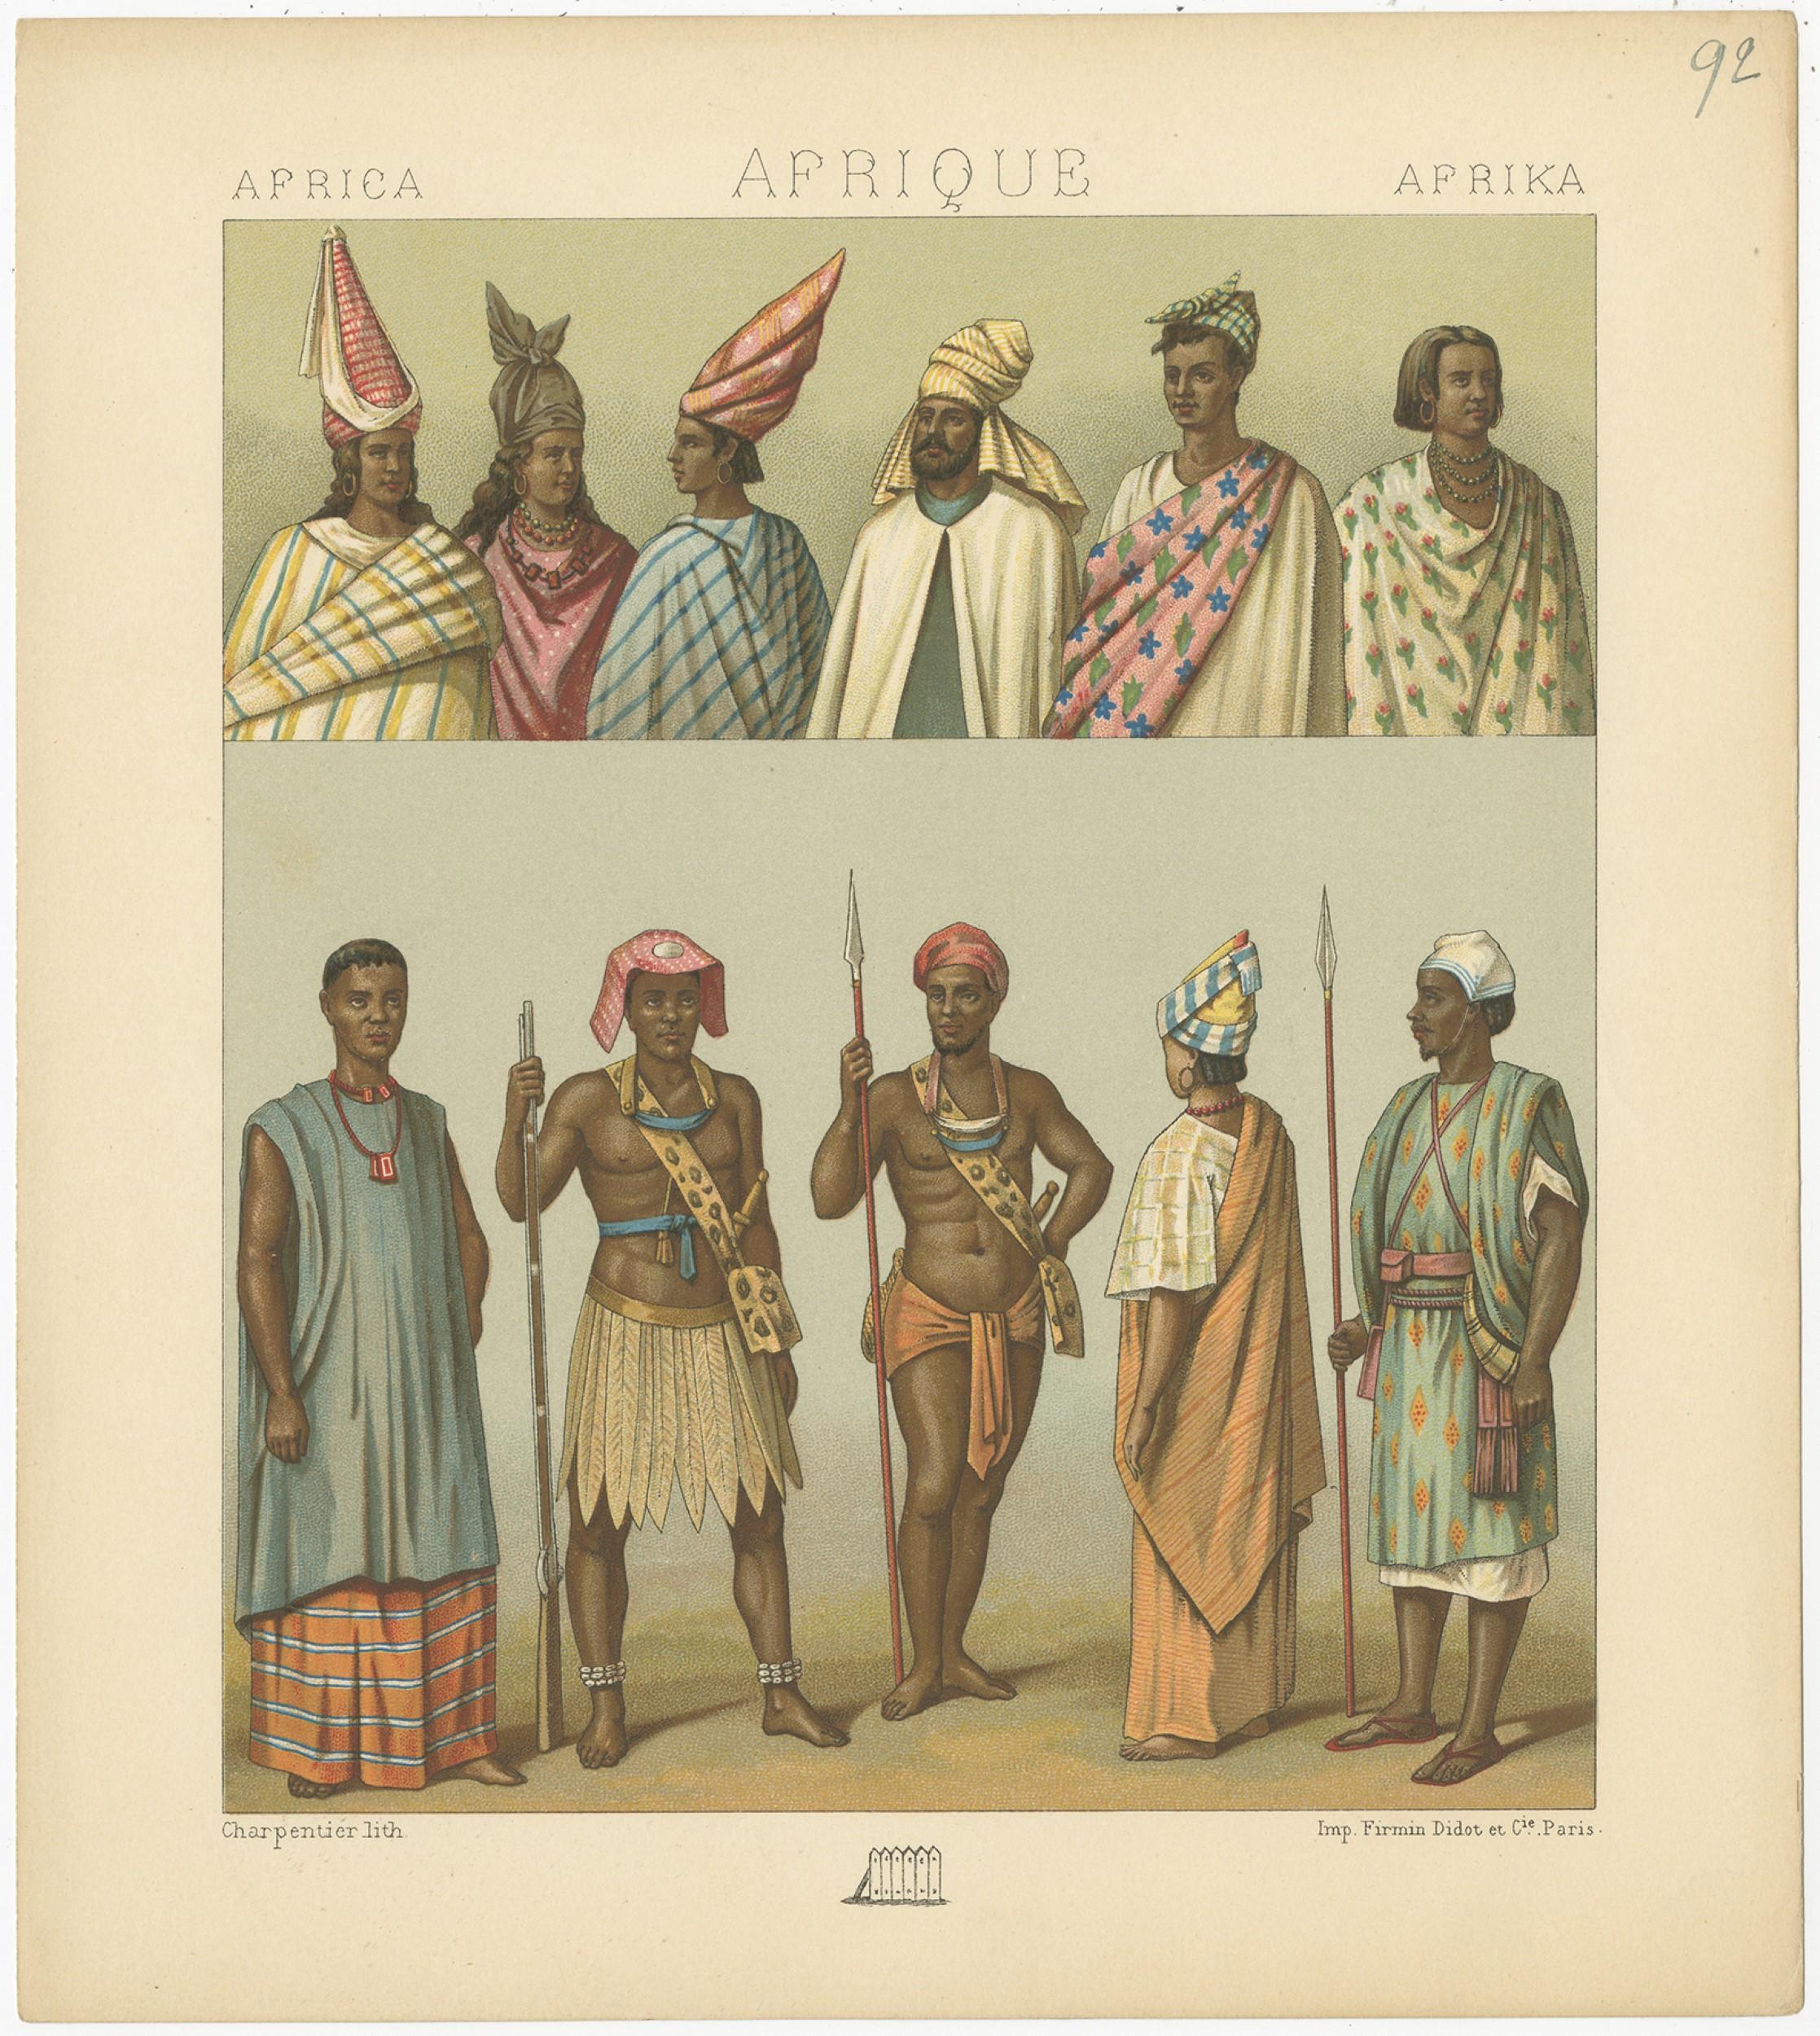 Antique print titled 'Africa - Afrique - Afrika'. Chromolithograph of African costumes. This print originates from 'Le Costume Historique' by M.A. Racinet. Published, circa 1880.